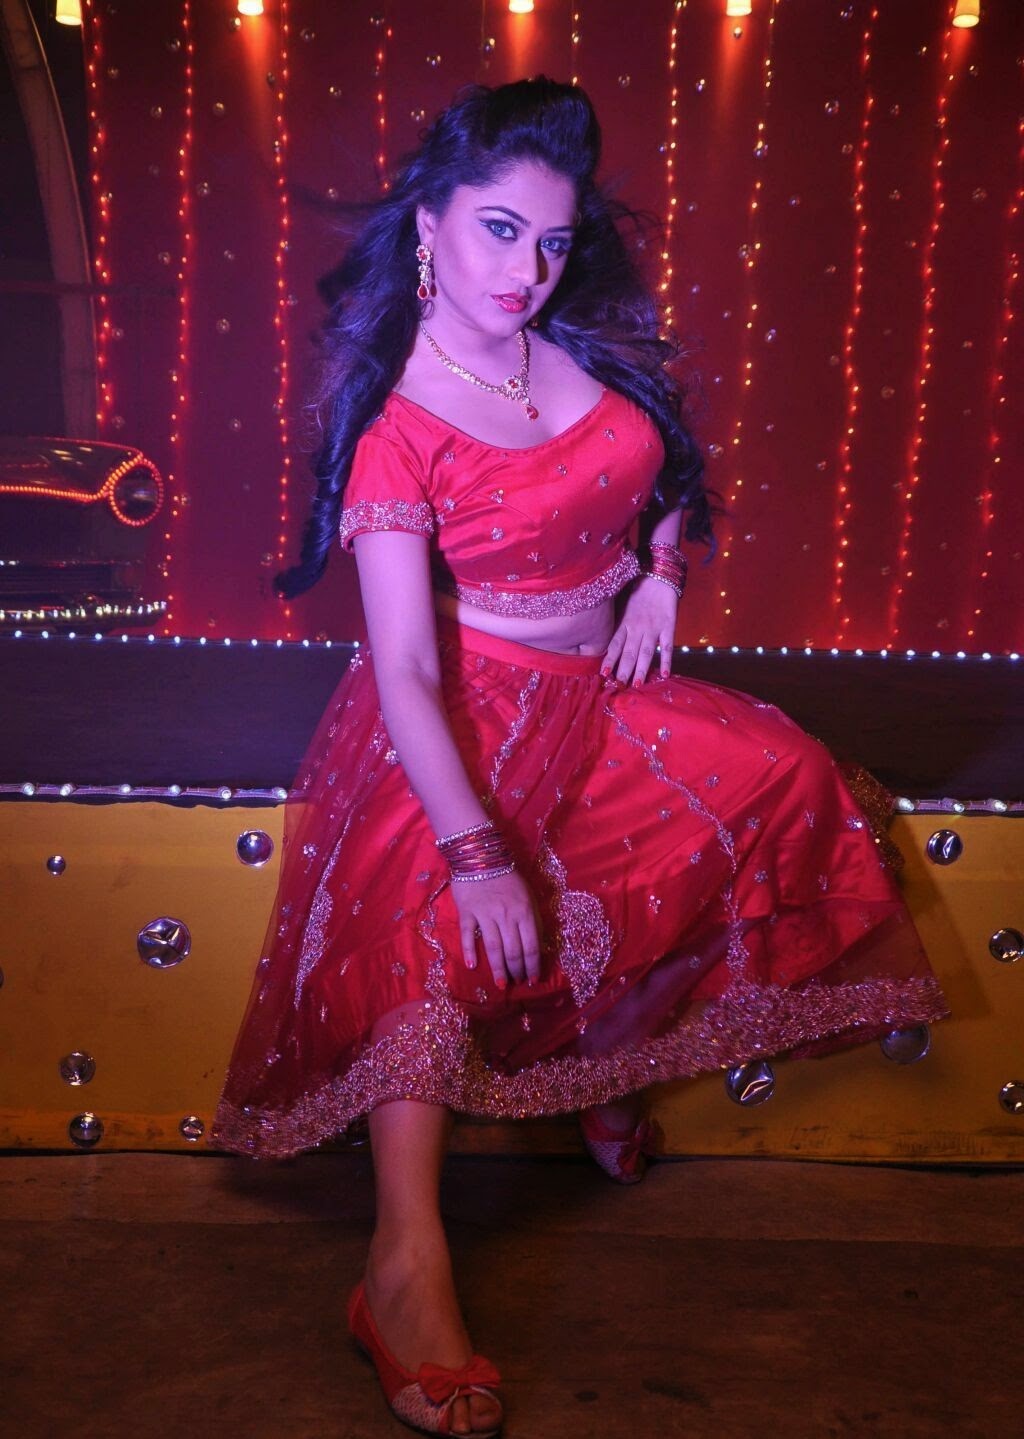 Actress Ramya Barna Hot Spicy Navel Show in Red Dress Gallery